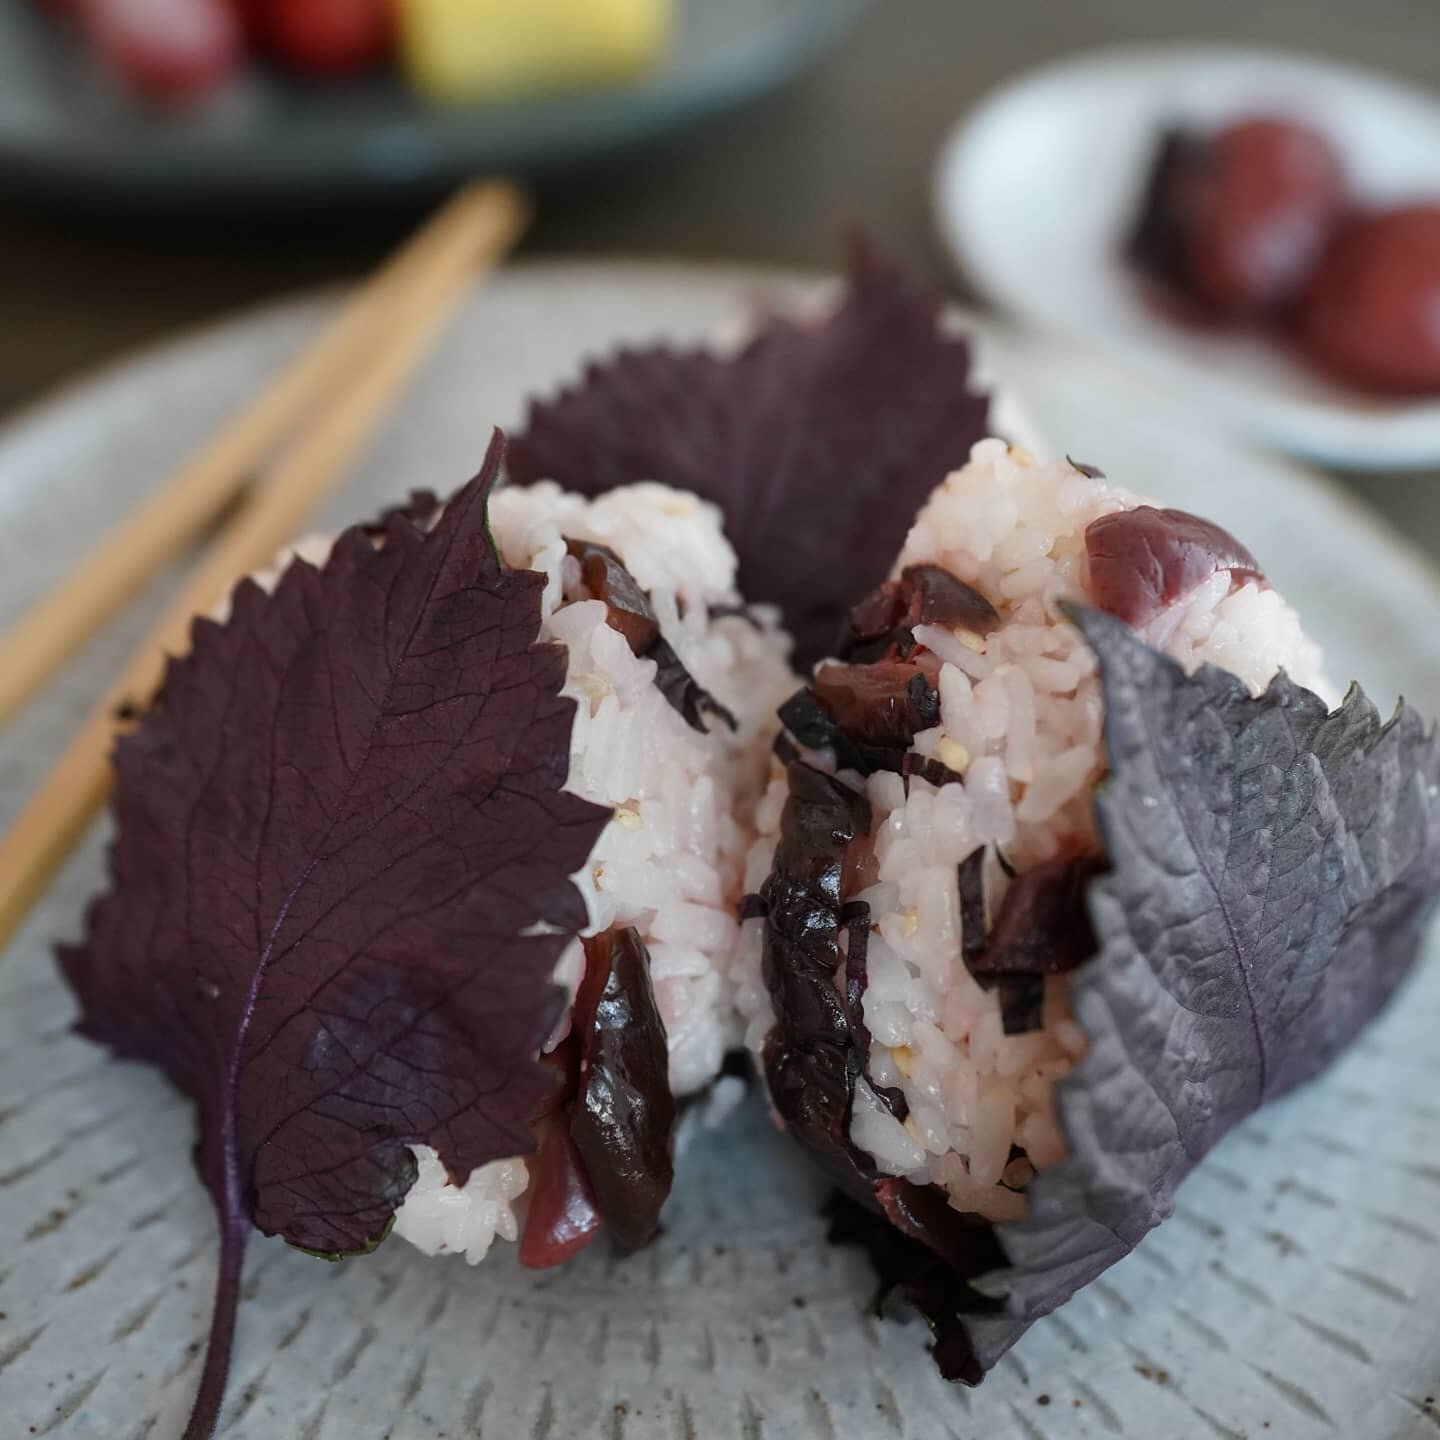 Shibazuke is a traditional Kyoto-style pickle made by pickling eggplant, cucumber, and red shiso in salt and fermenting them with lactic acid.⁠
This is my kids' favorite pickle, and in the mornings when I am short on time, I mix it with rice to make 